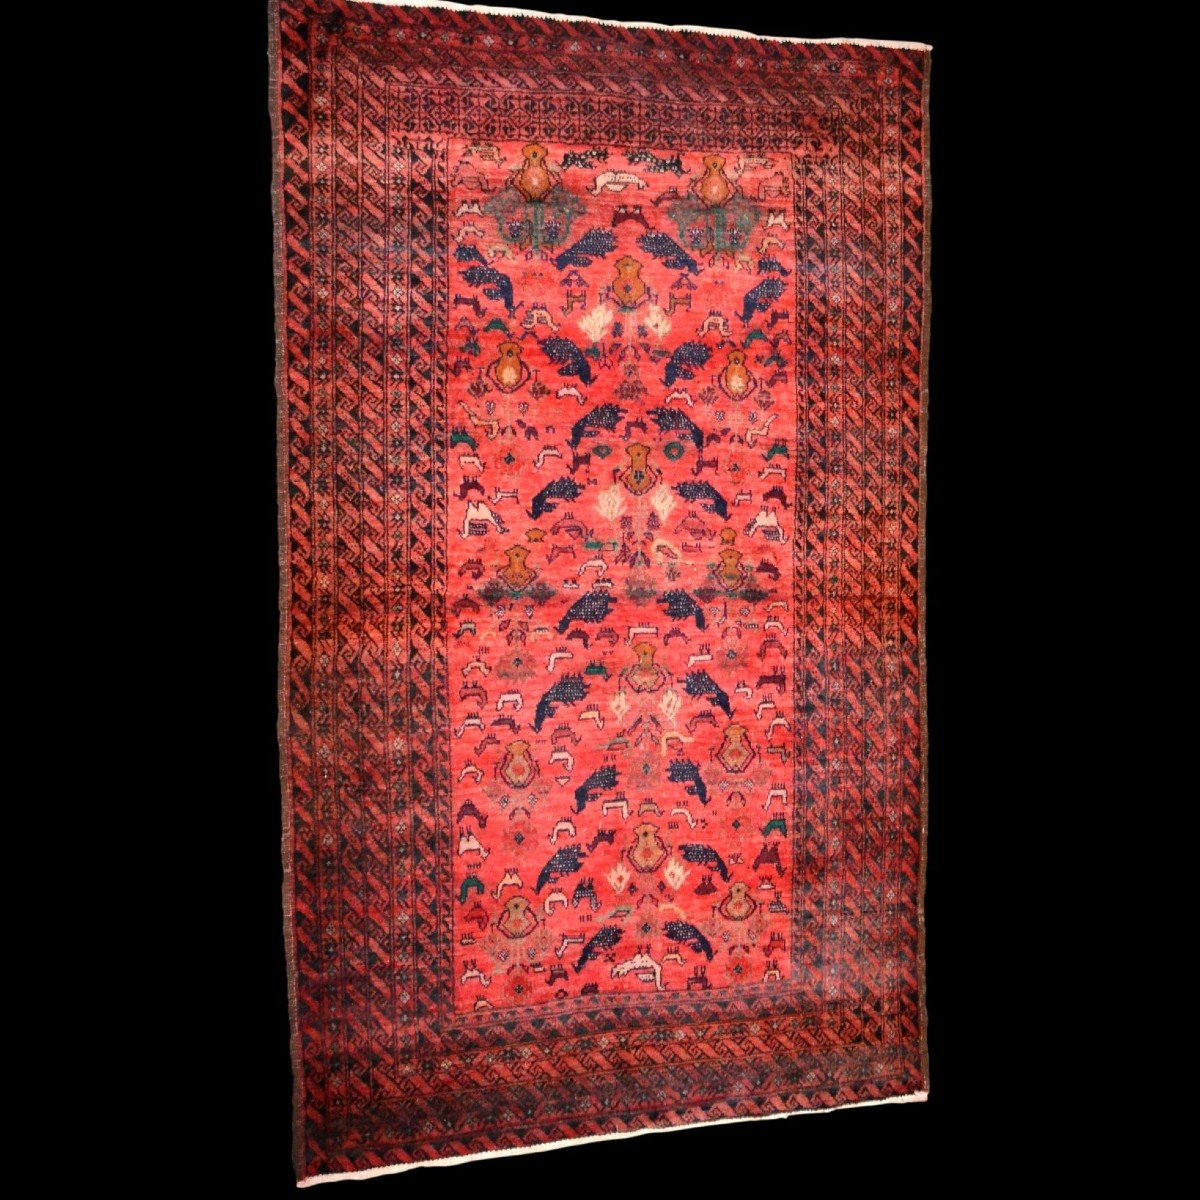 Baluche, Animal Decor, 115 X 193 Cm, Hand-knotted Wool In Iran, 1950-1960, Very Good Condition-photo-2